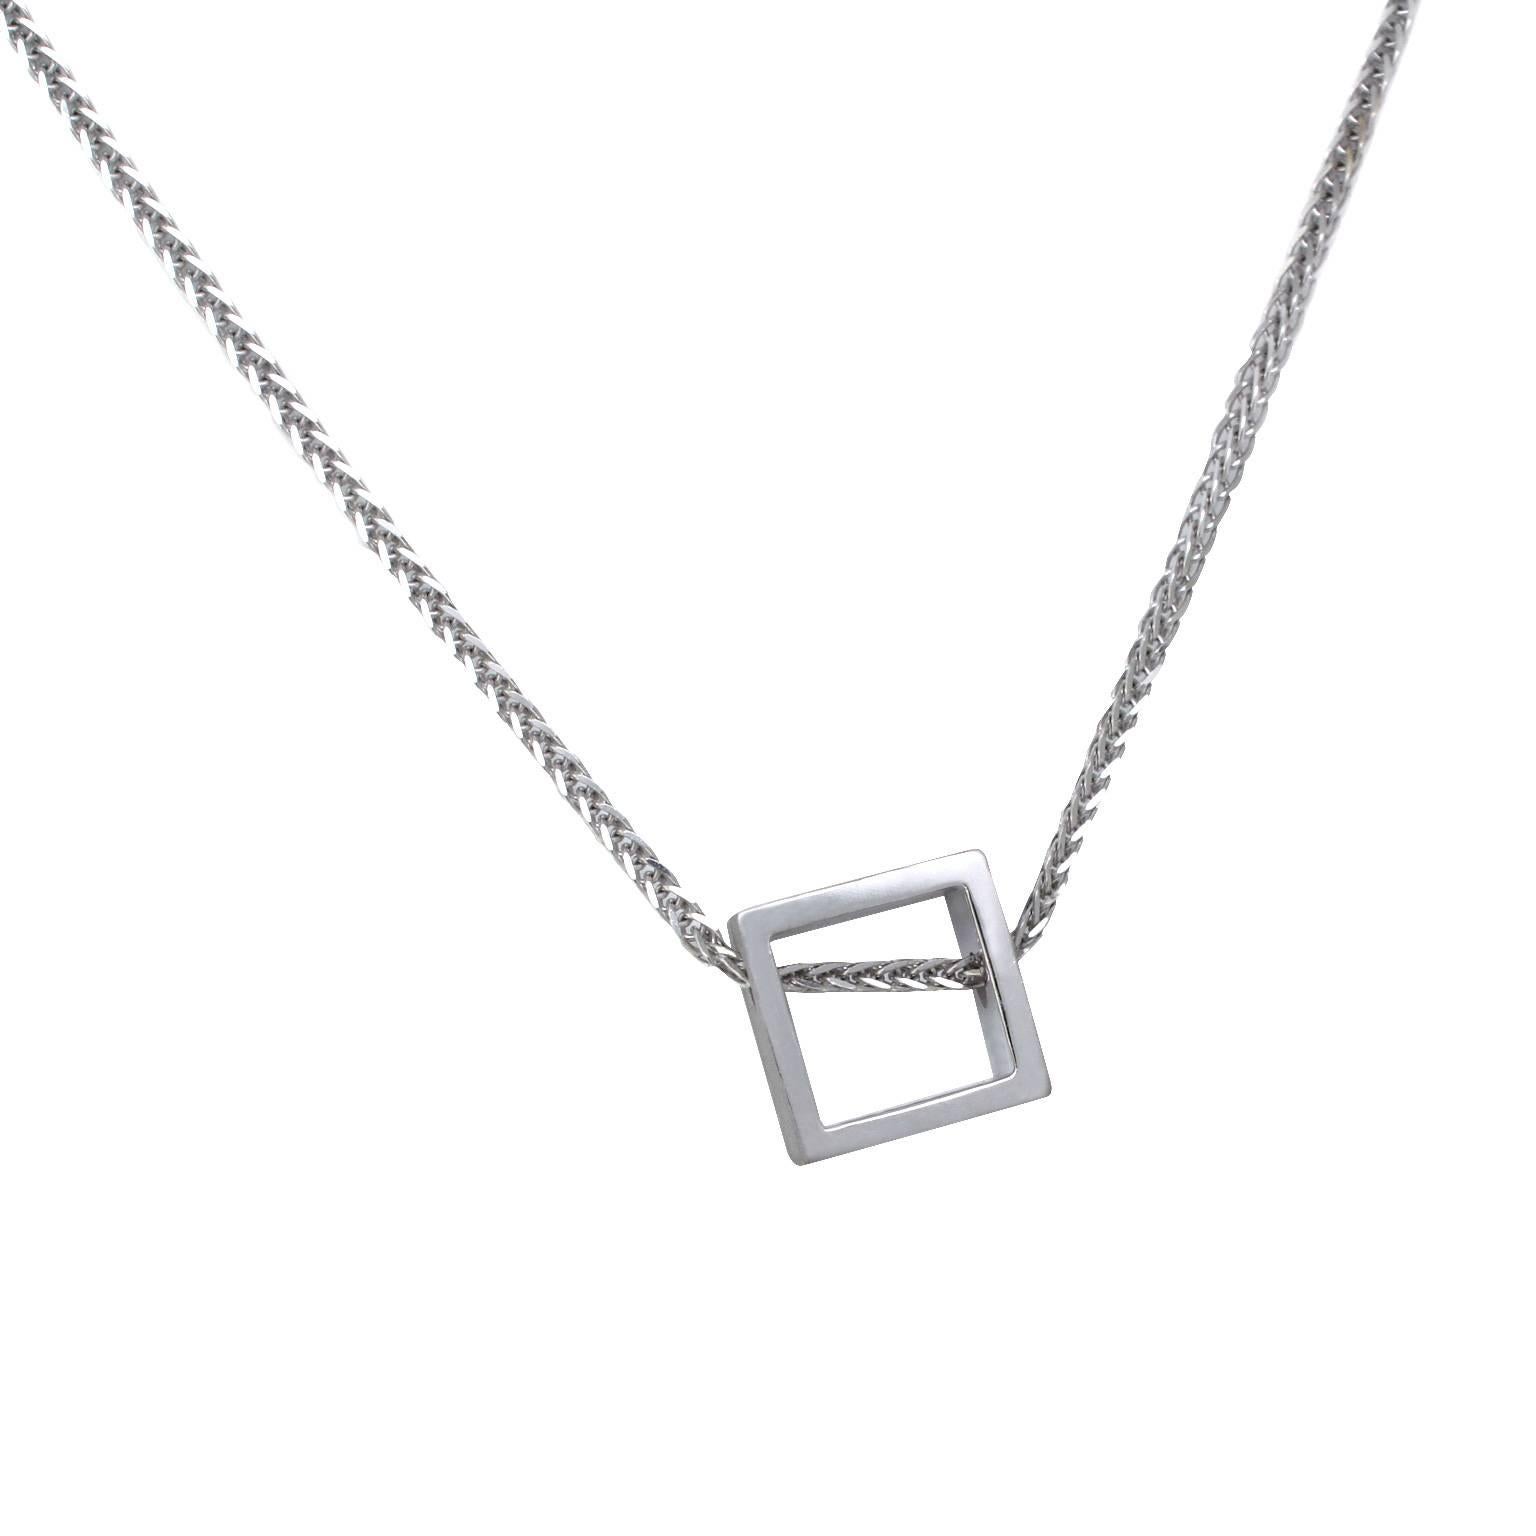 This minimalist geometric pendant sits slightly off-centre, creating a playful effect, and expressing the idea of non-conformity within the boundaries of conformity. The pendant's design utilises negative space, transforming it into a miniature